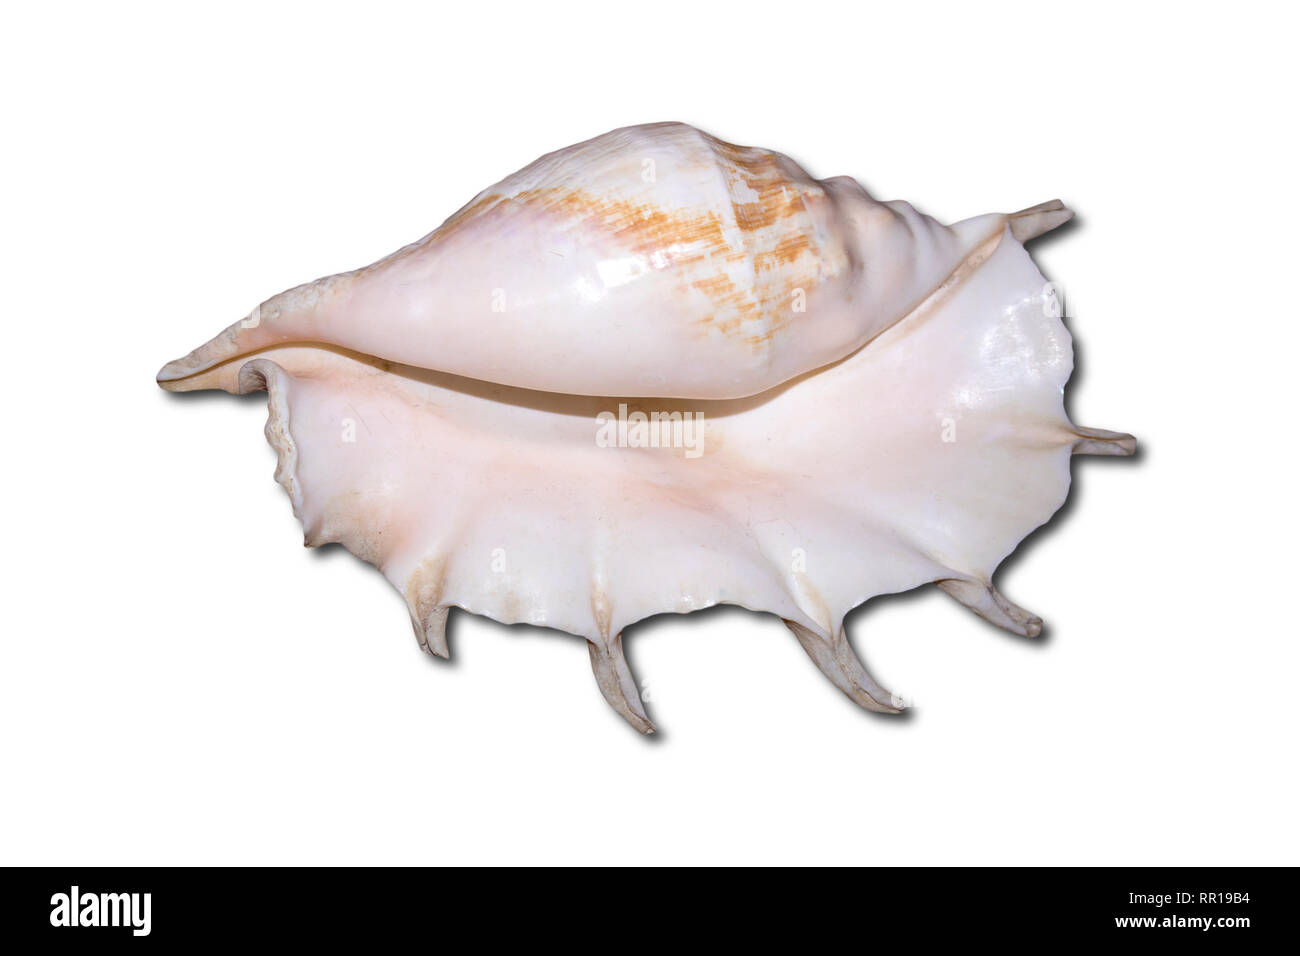 Huge white sea shell with a pearl tone isolated on white background Stock Photo